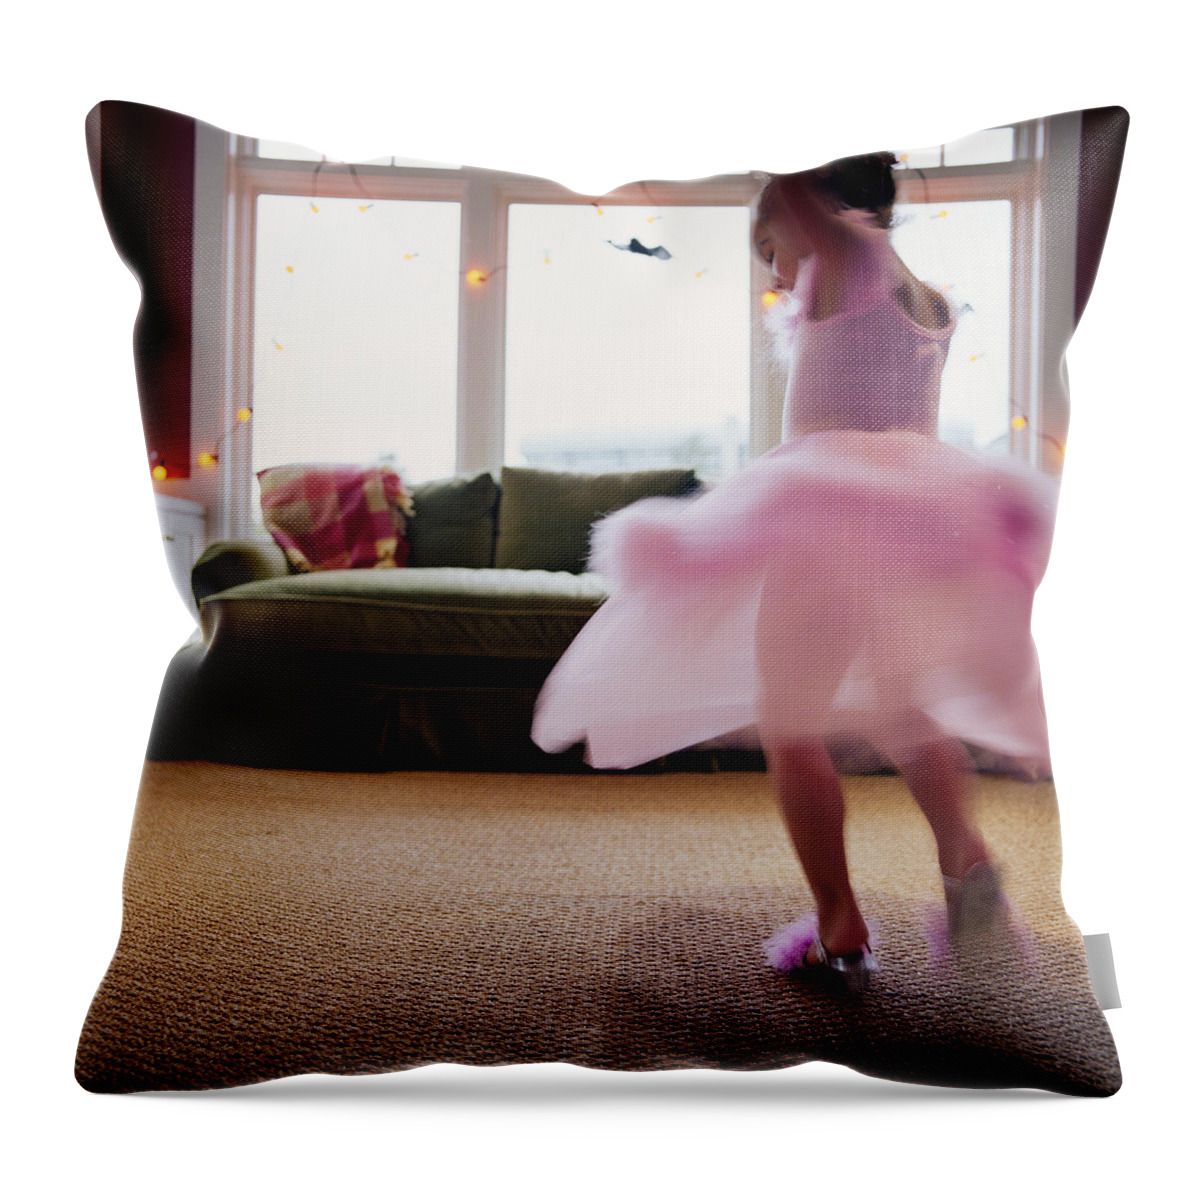 Ballet Dancer Throw Pillow featuring the photograph Girl 4-6 In Ballerina Costume, Dancing by Chad Baker/jason Reed/ryan Mcvay